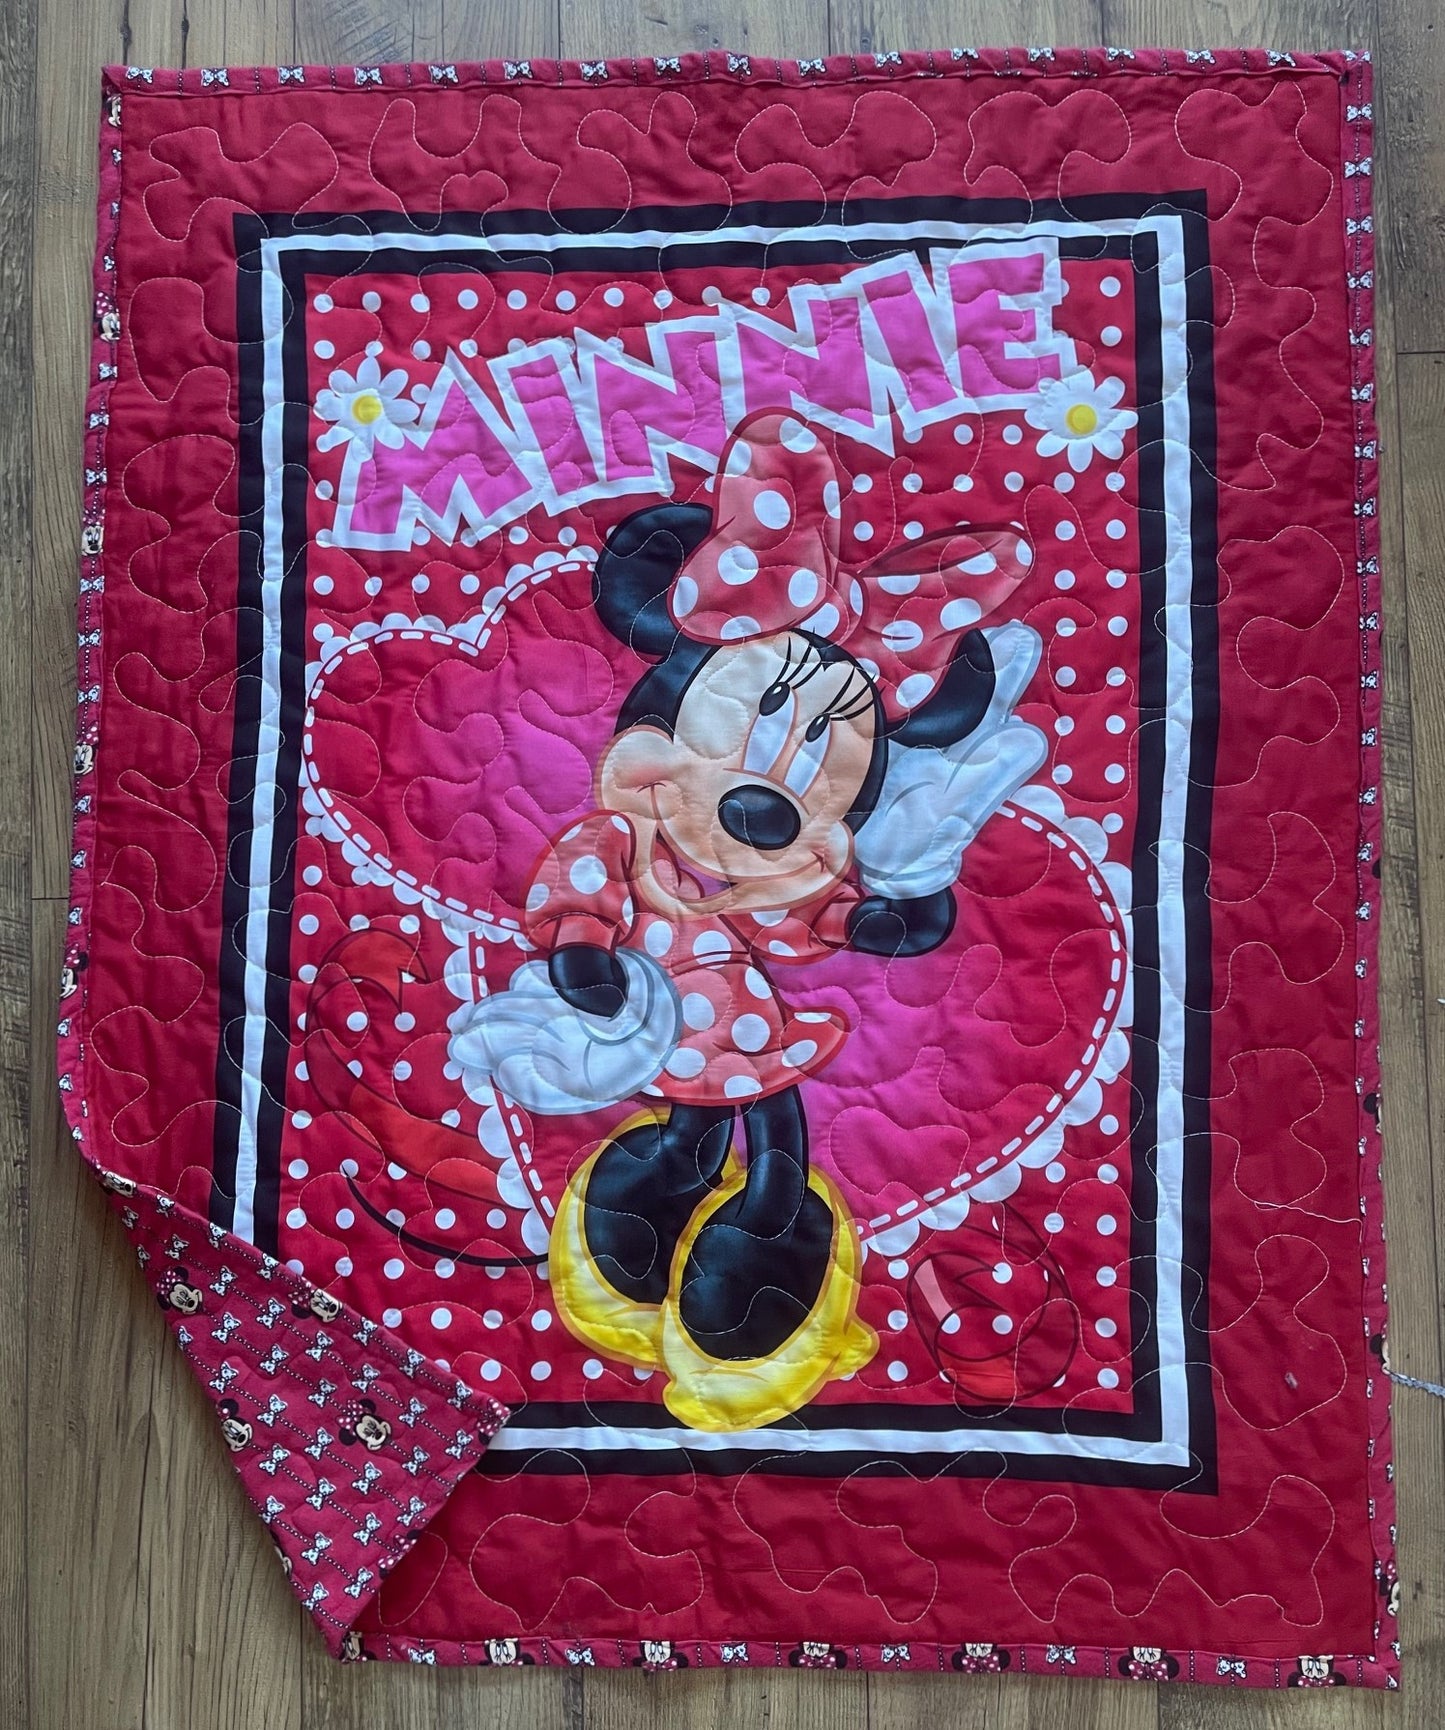 MINNIE MOUSE "LOVE MINNIE HEARTS" Inspired Quilted Blanket with Soft Flannel Backing Fabric